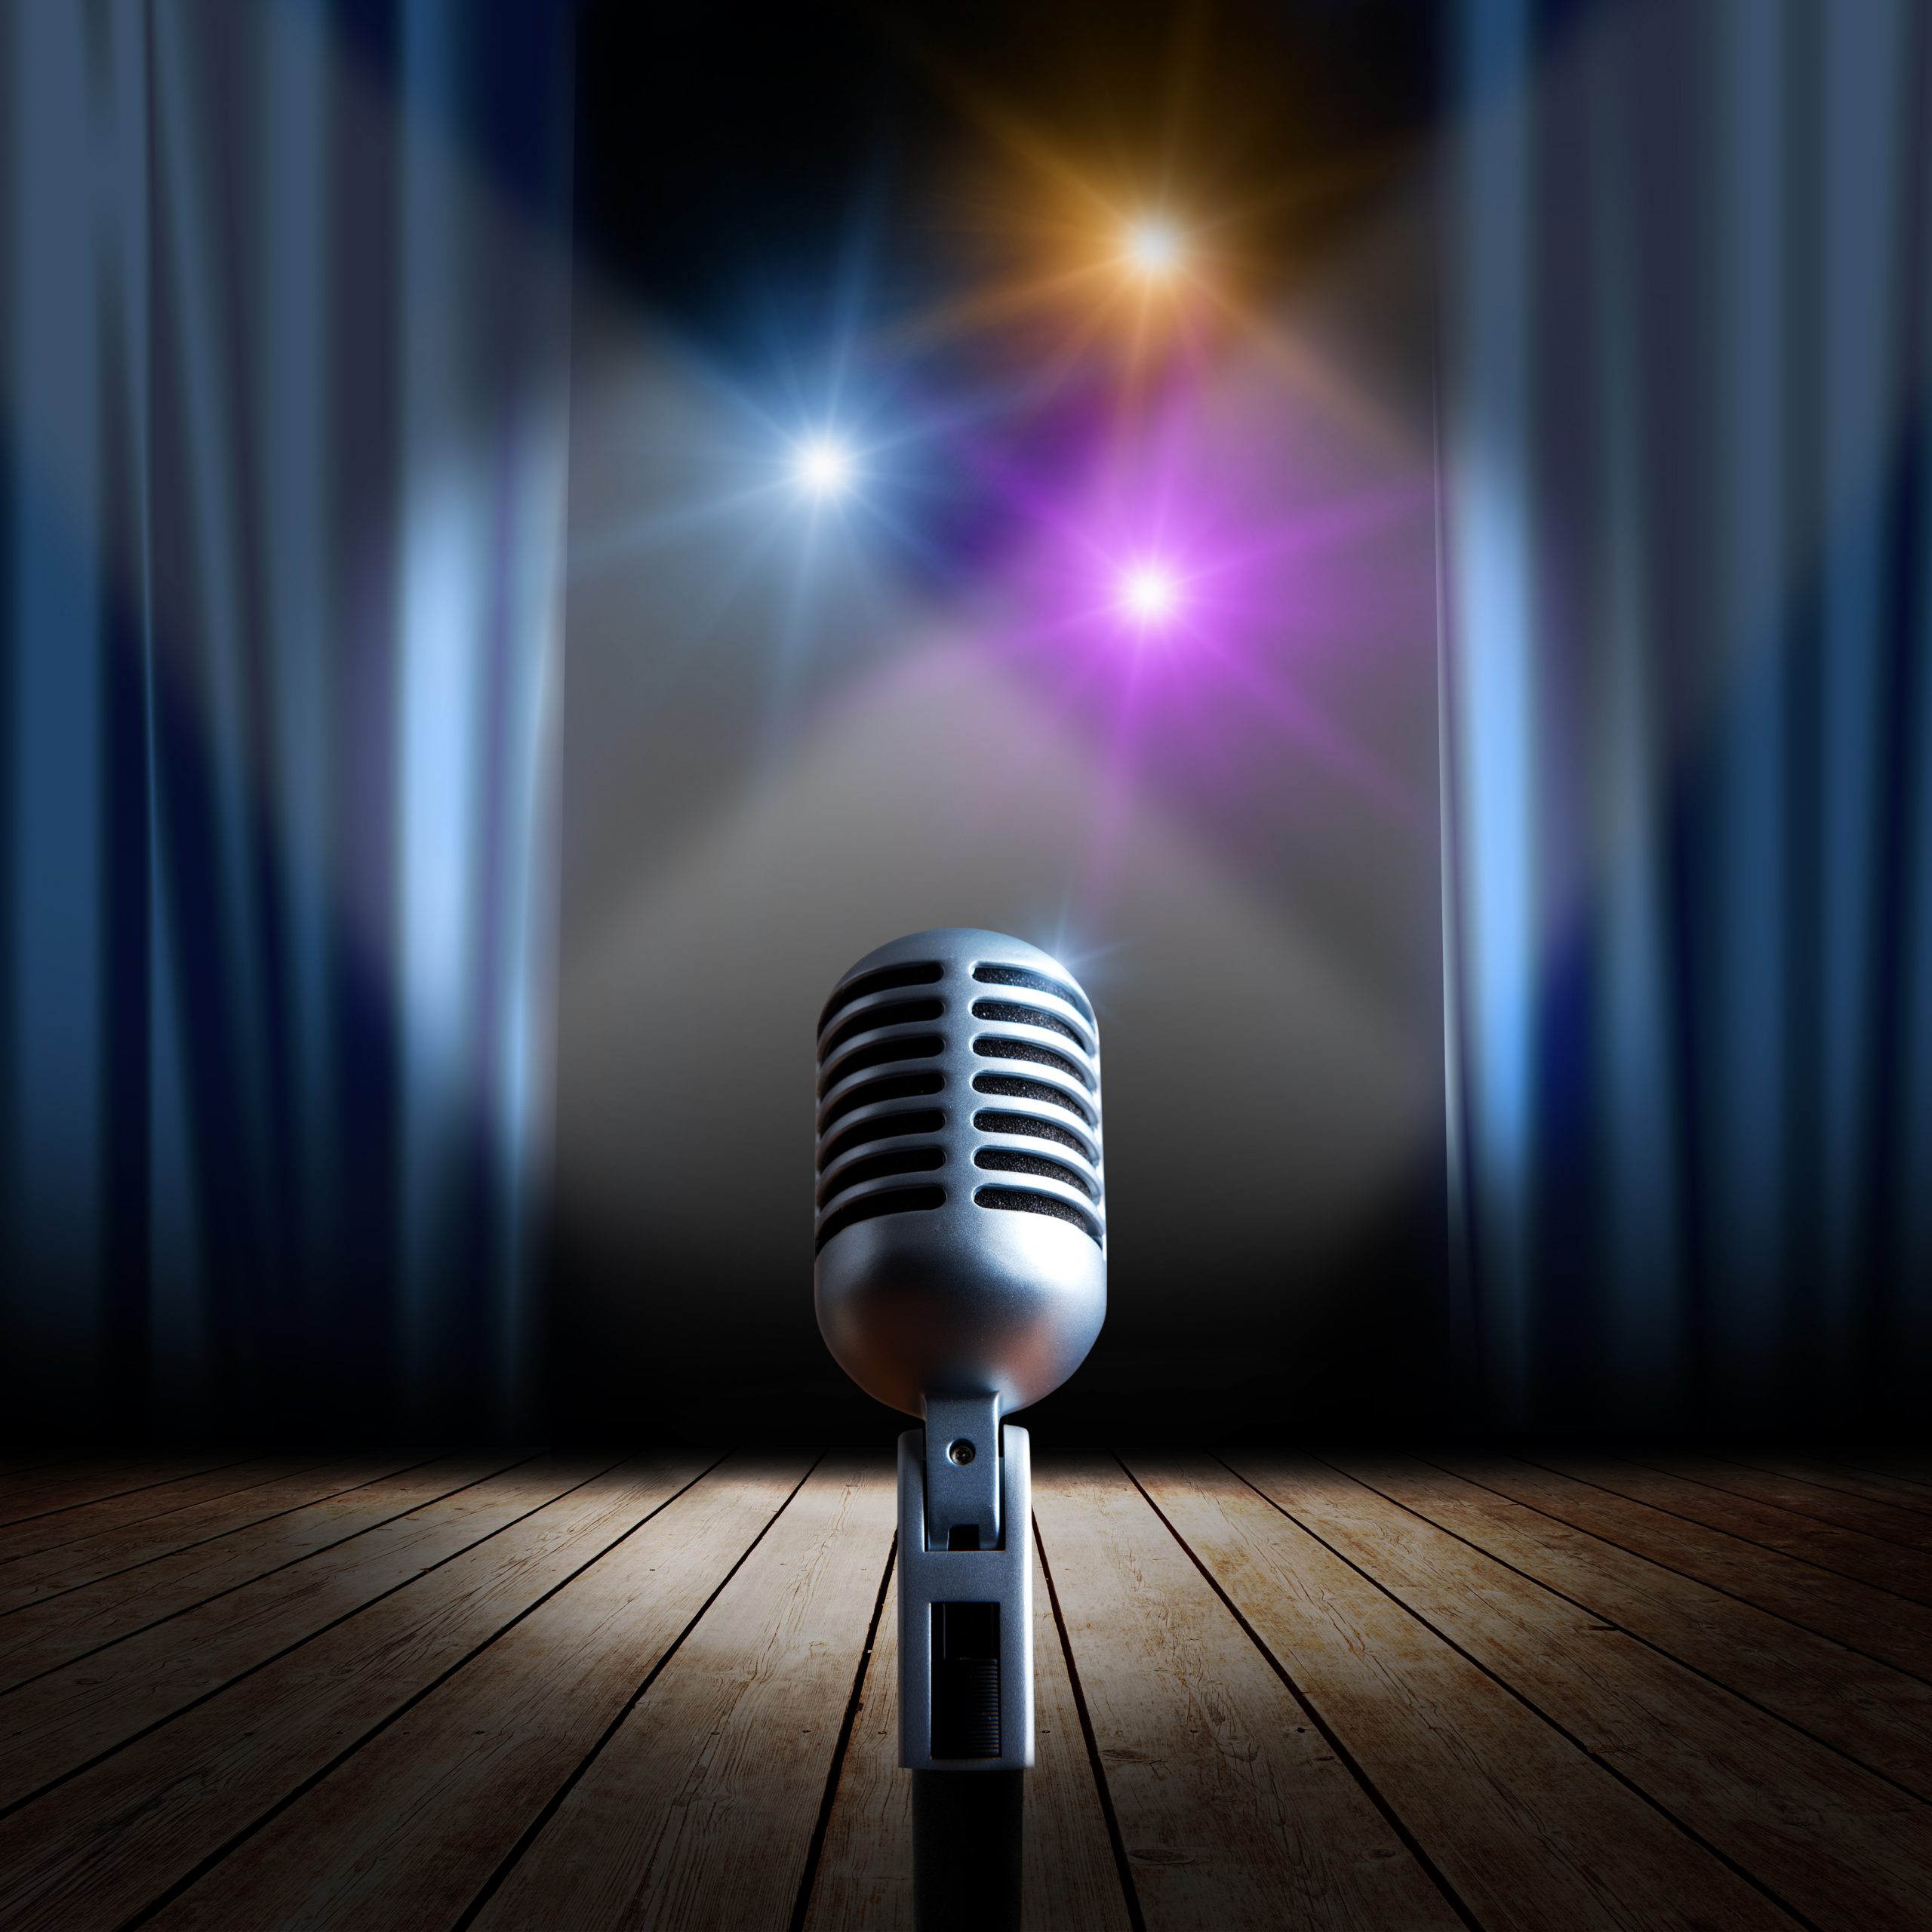 https://depositphotos.com/11016550/stock-photo-stage-and-retro-microphone.html